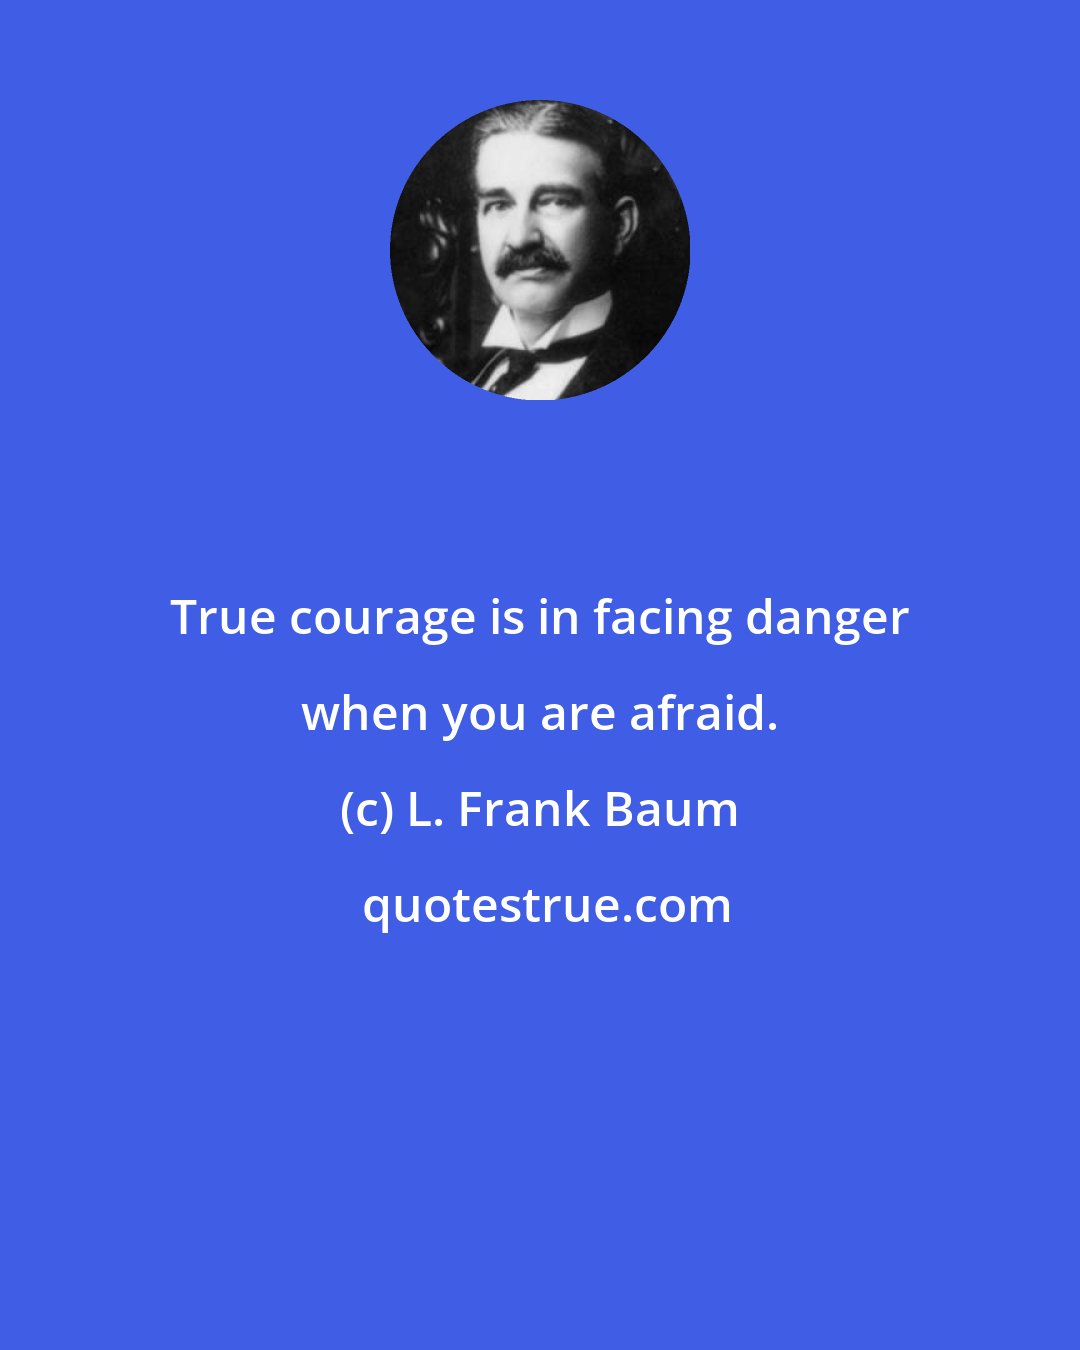 L. Frank Baum: True courage is in facing danger when you are afraid.